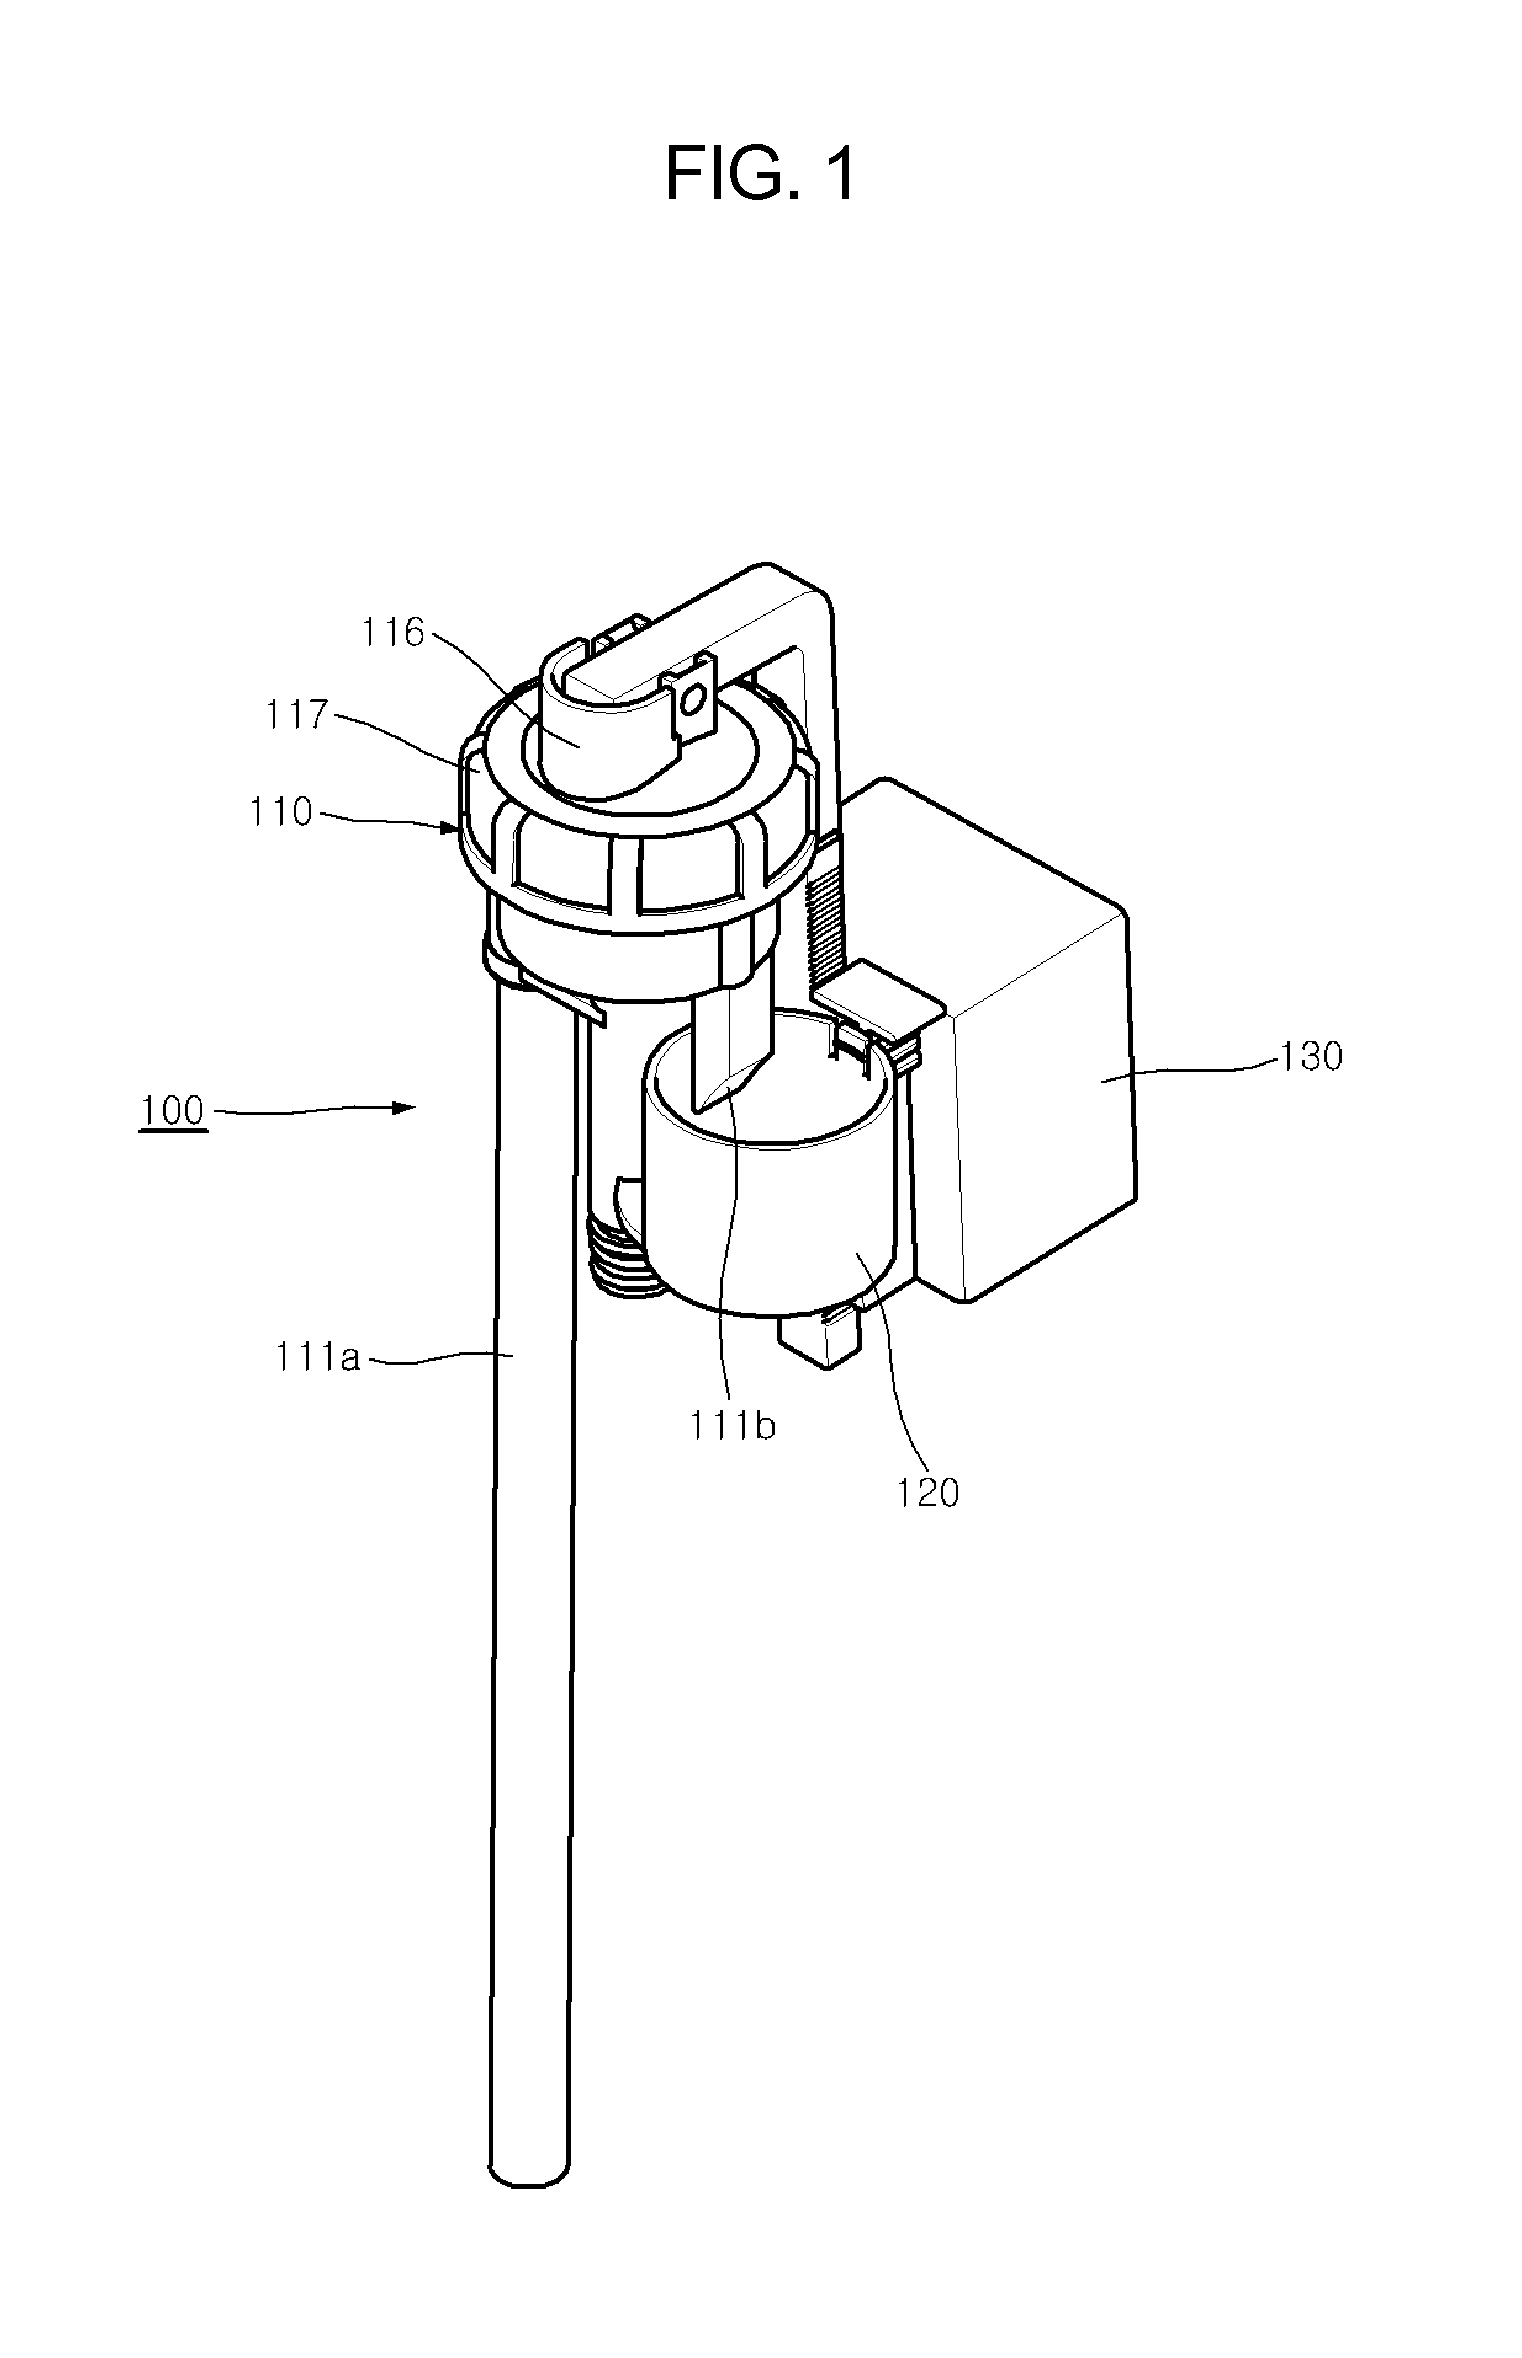 Apparatus for preventing backflow of fill valve in water toilet